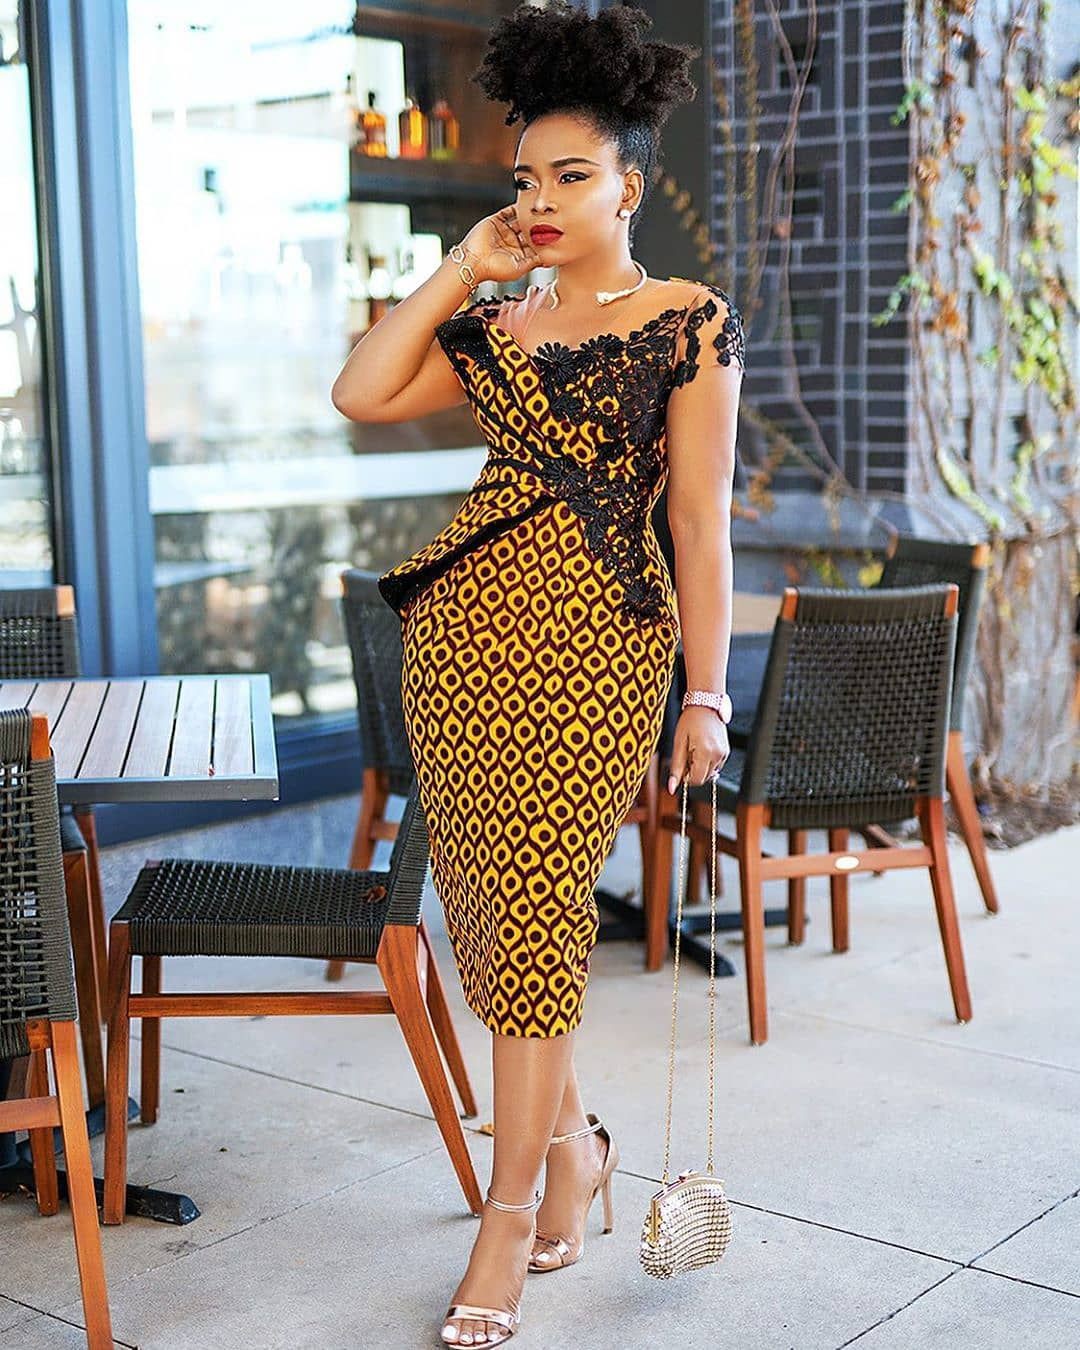 Good To Try Fashion Model African Wax Prints Latest Ankara Styles 2020 African Dress 